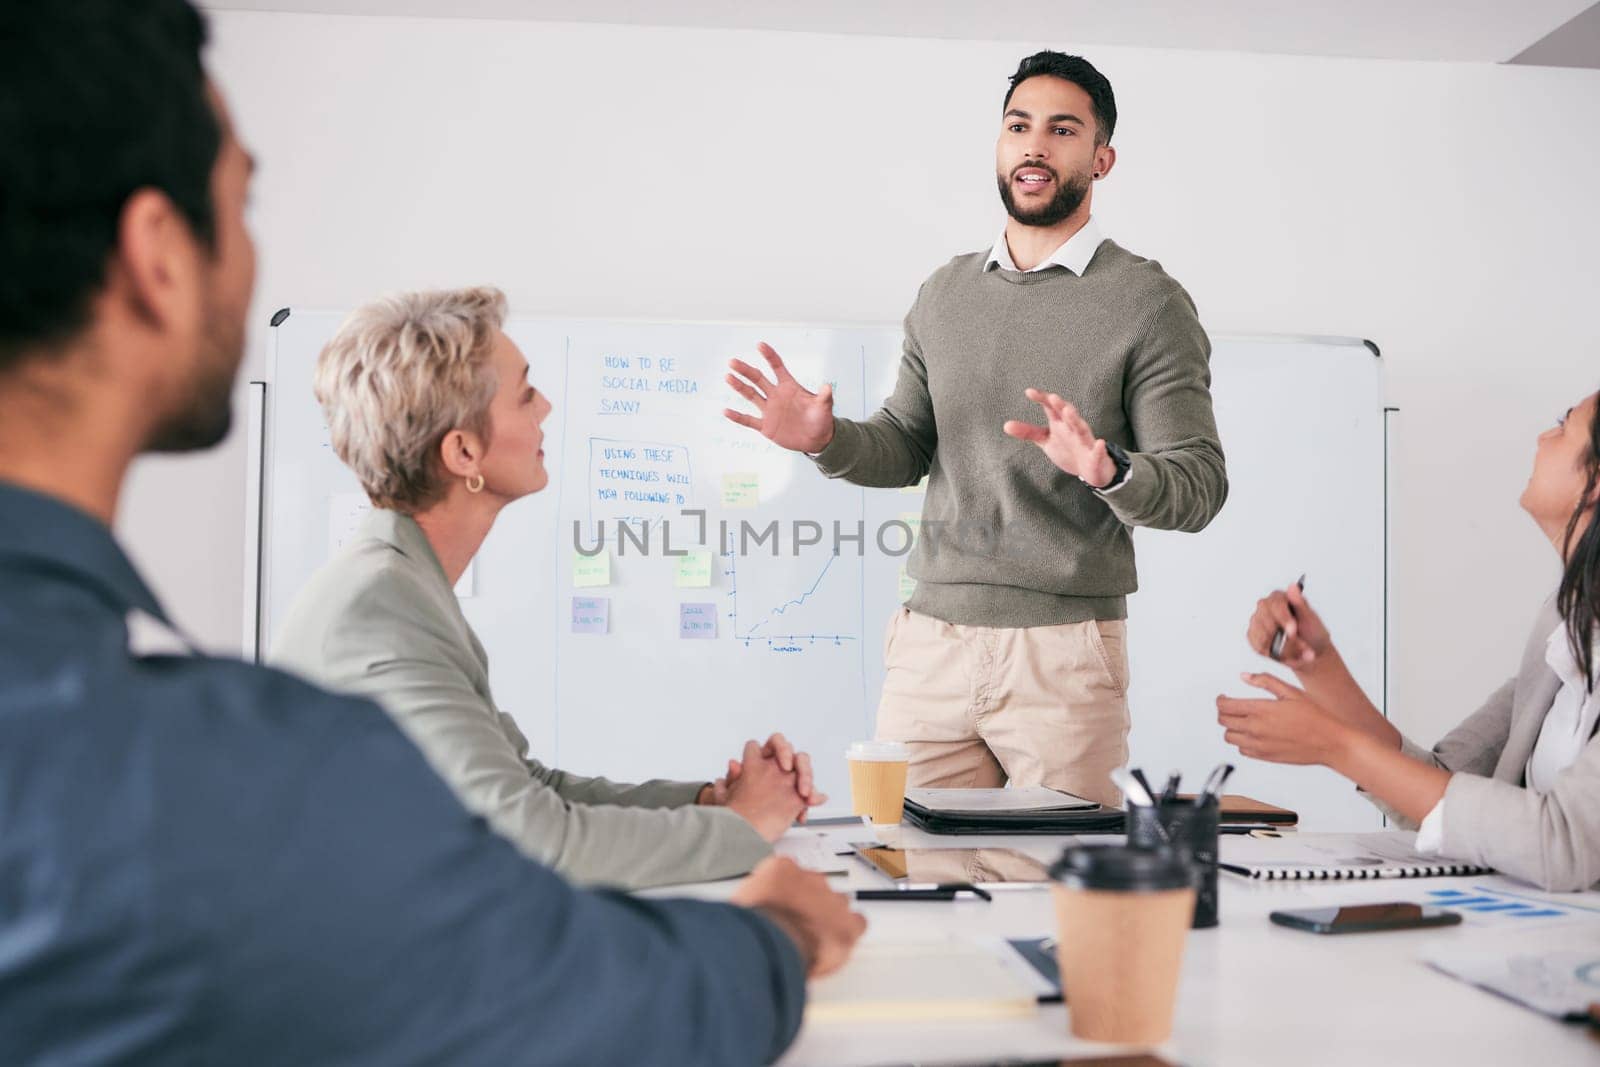 Business meeting, presentation and speaker, people and whiteboard for audience training, coaching or project ideas. Presenter, manager or man proposal, company pitch and clients attention in workshop.